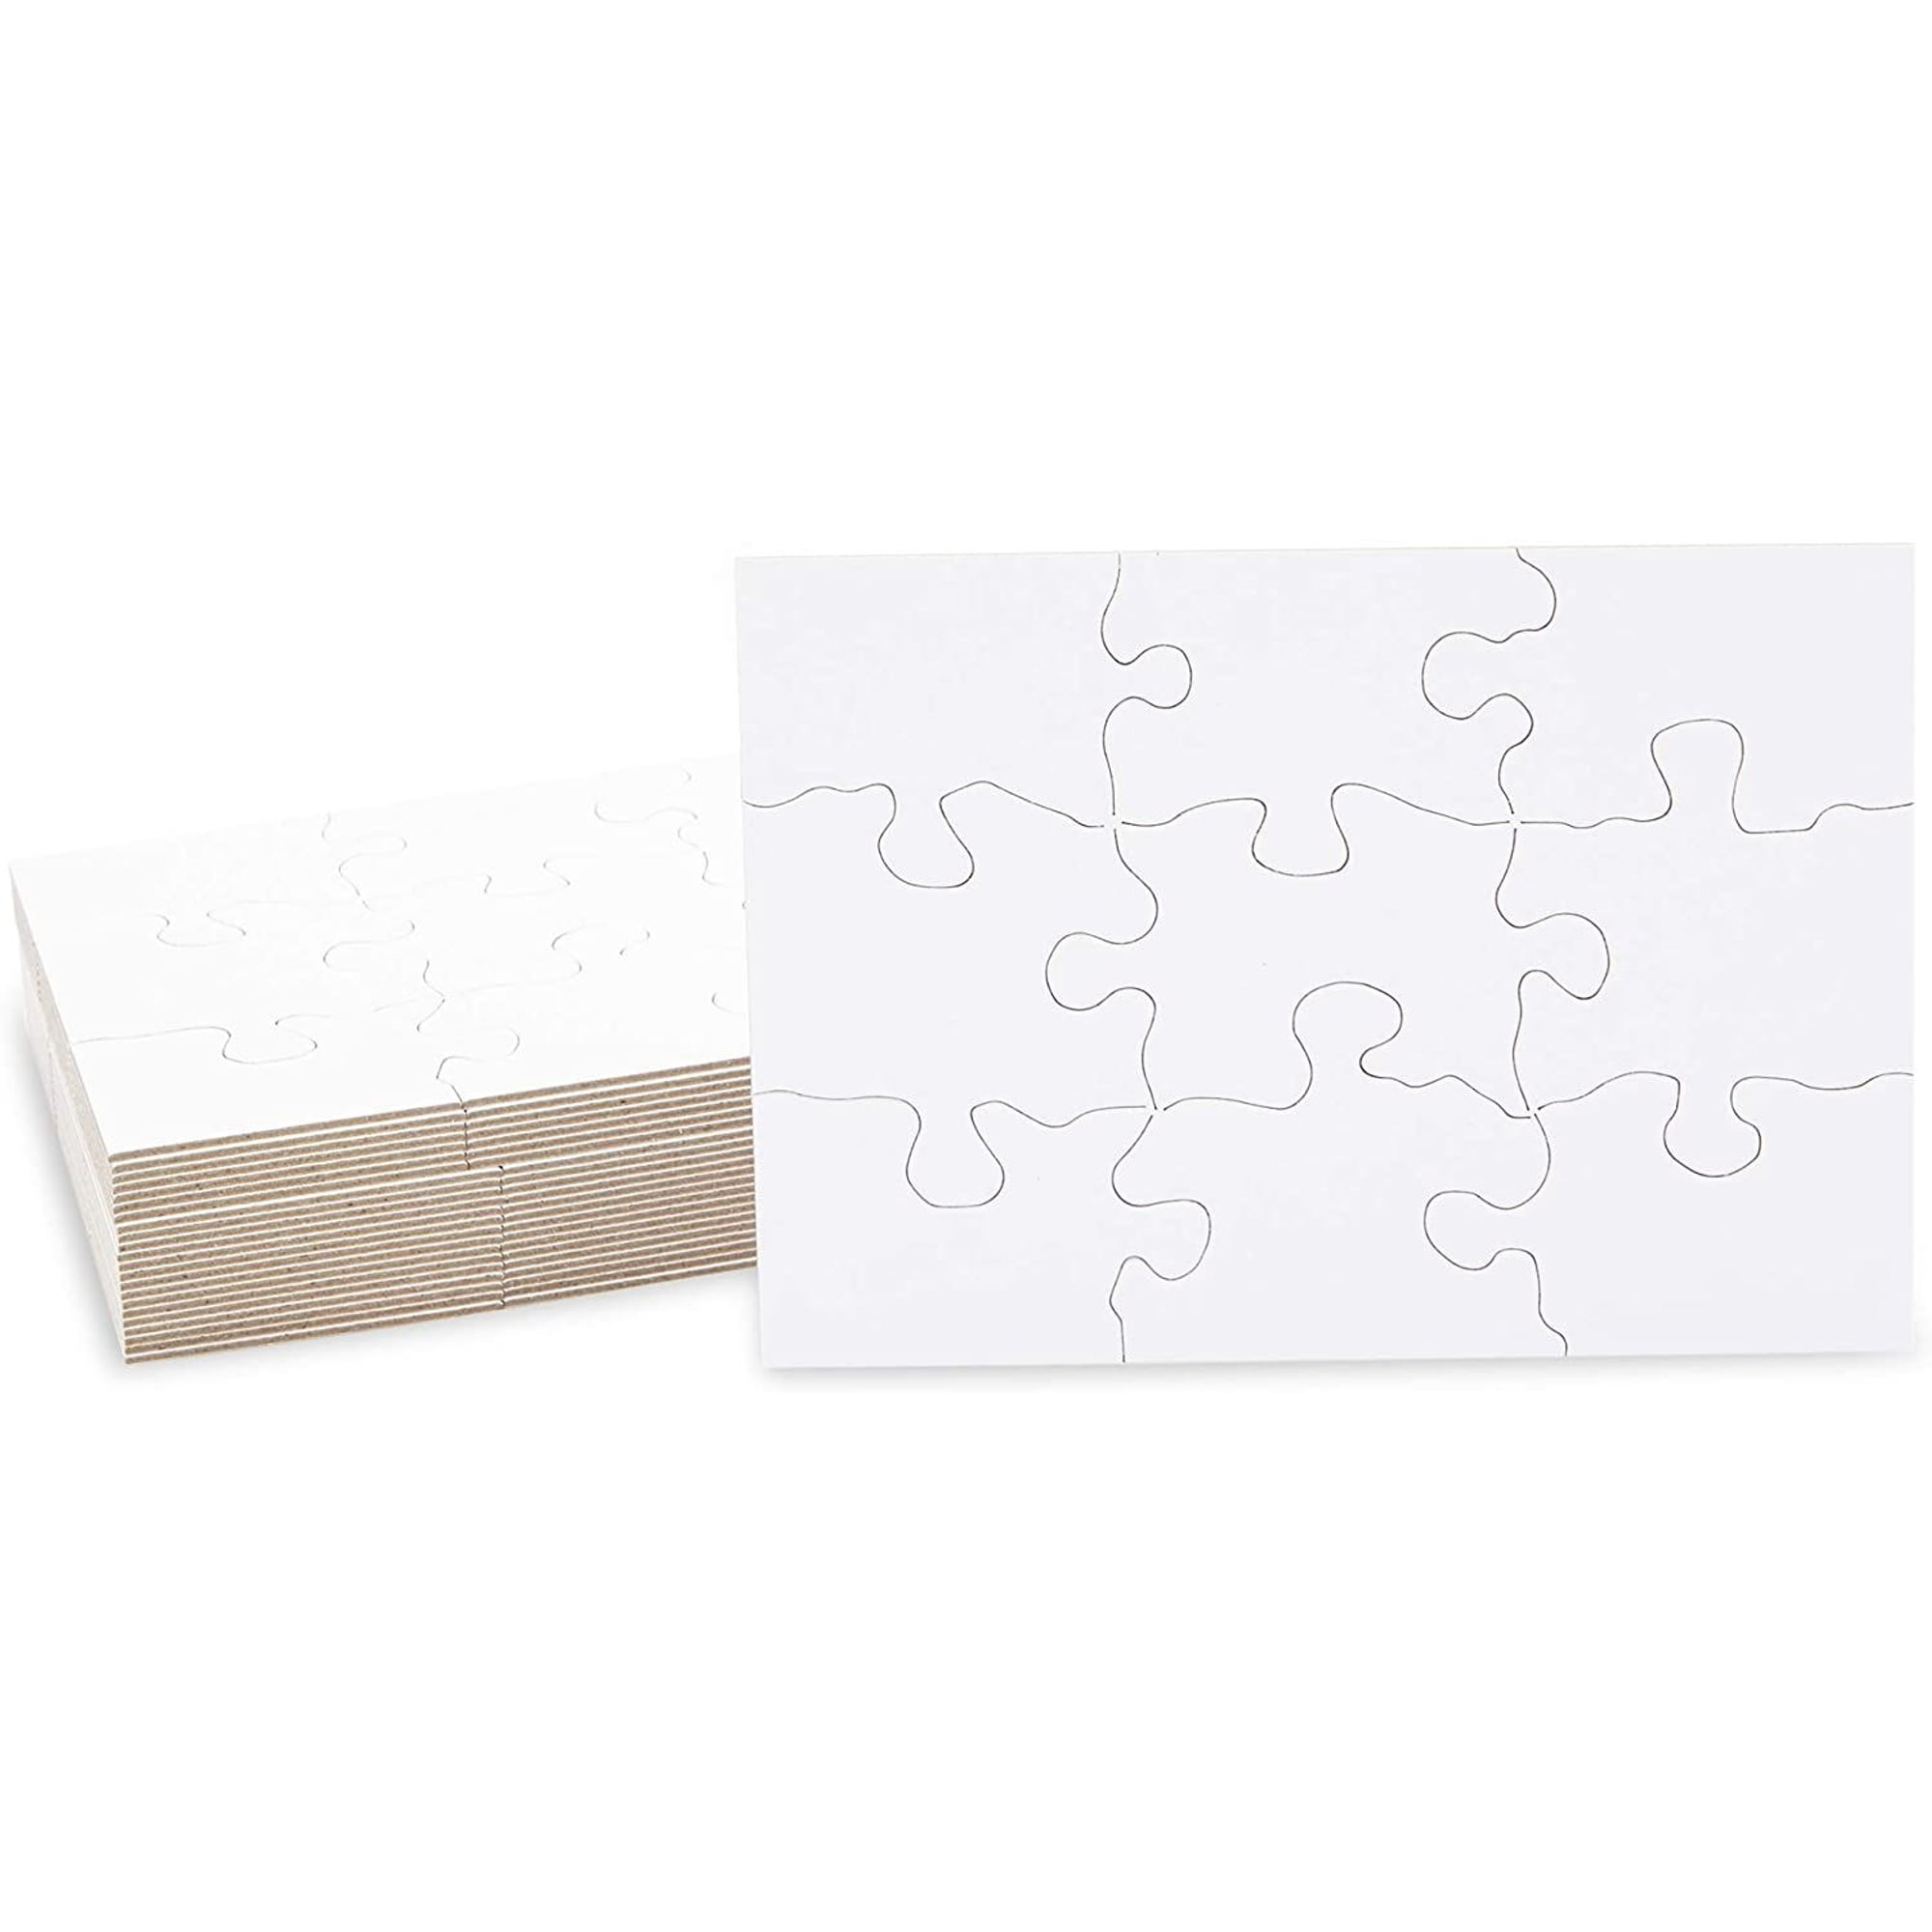 Inovart 2701 5.5 x 8 in. Blank Puzzle, White - 12 Piece - 12 Per Pack 